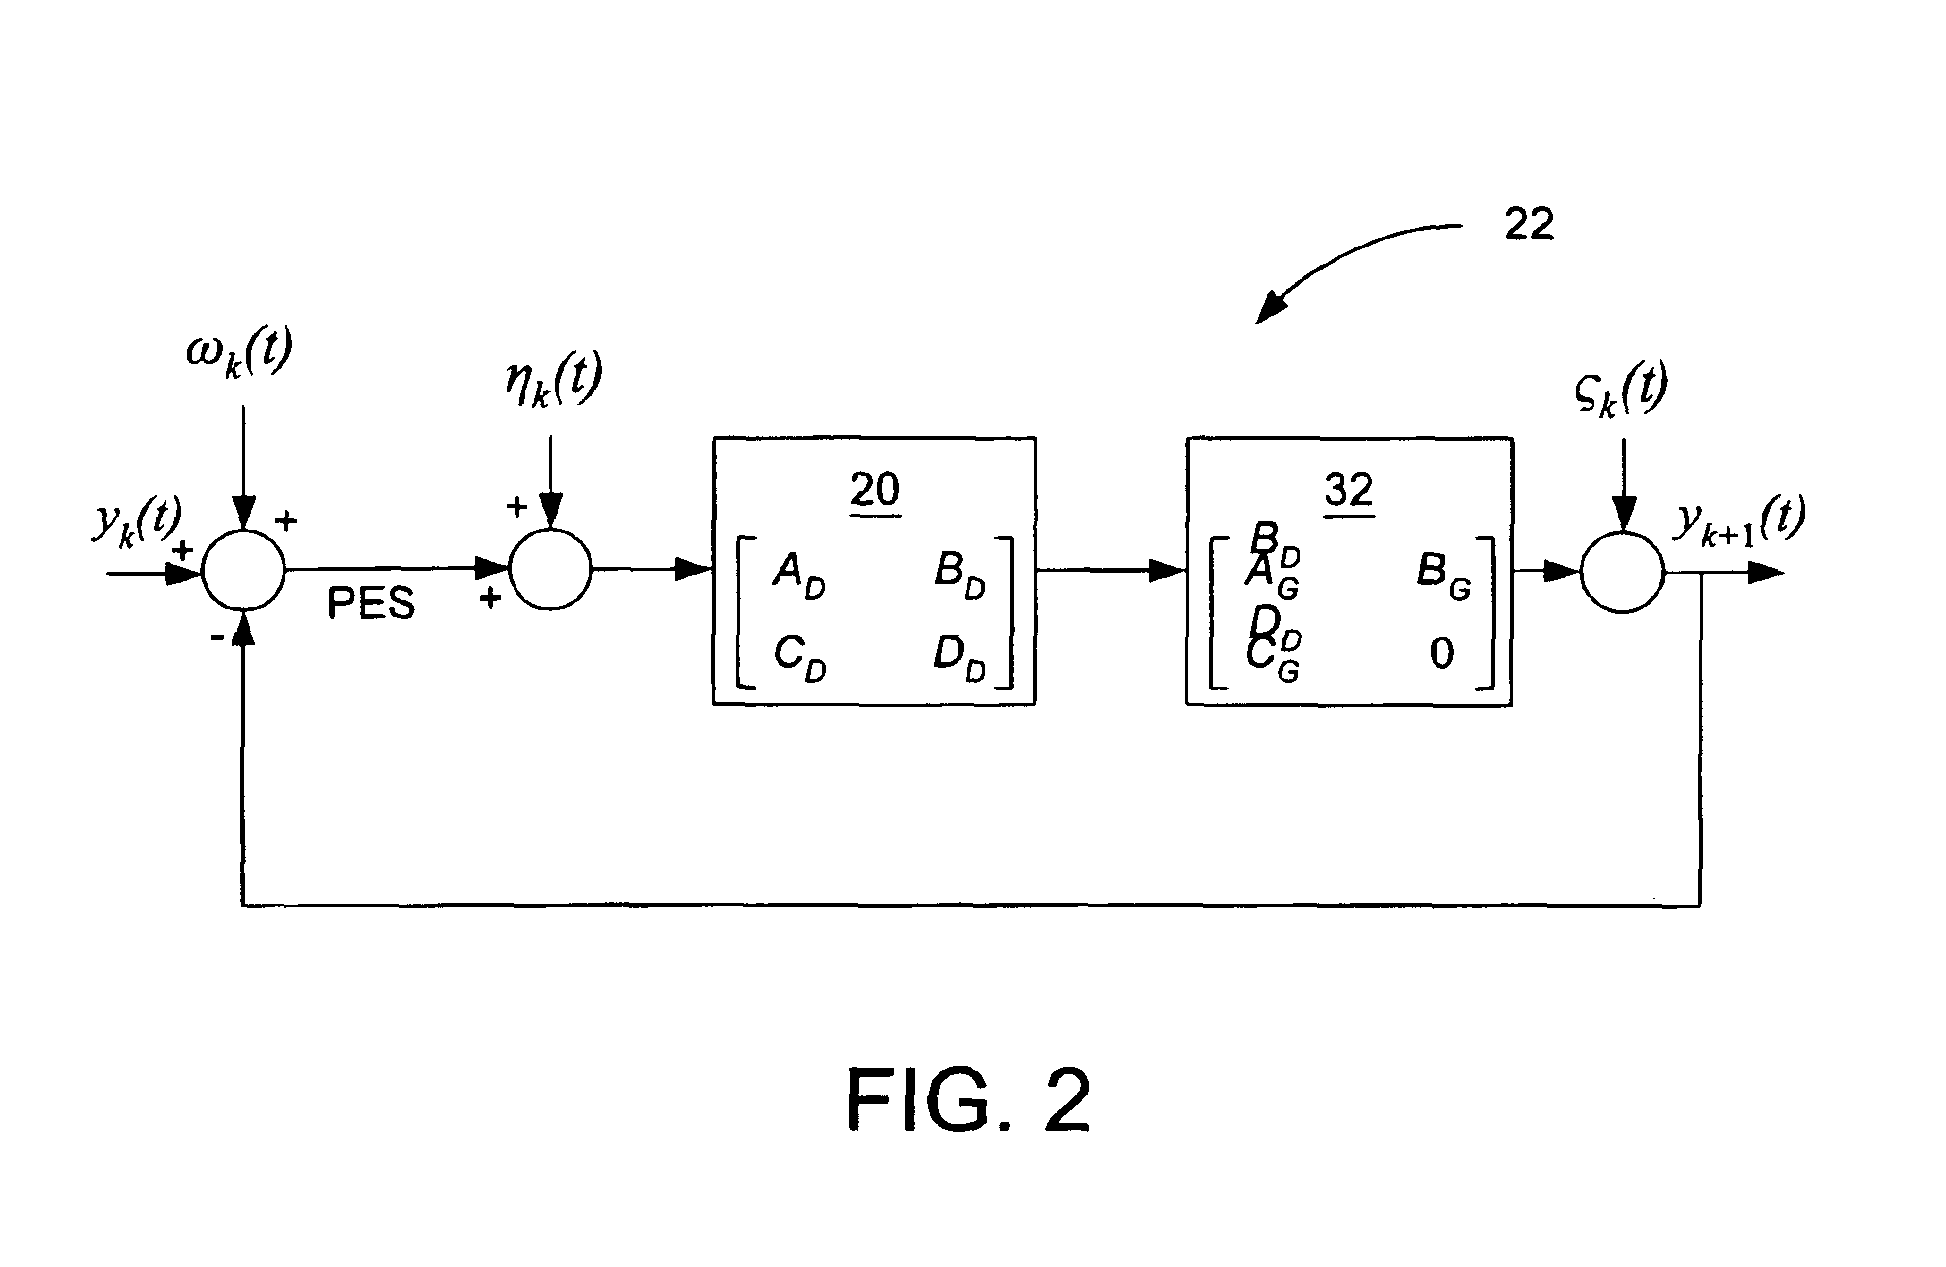 Method and apparatus for self servowriting of tracks of a disk drive using an observer based on an equivalent one-dimensional state model